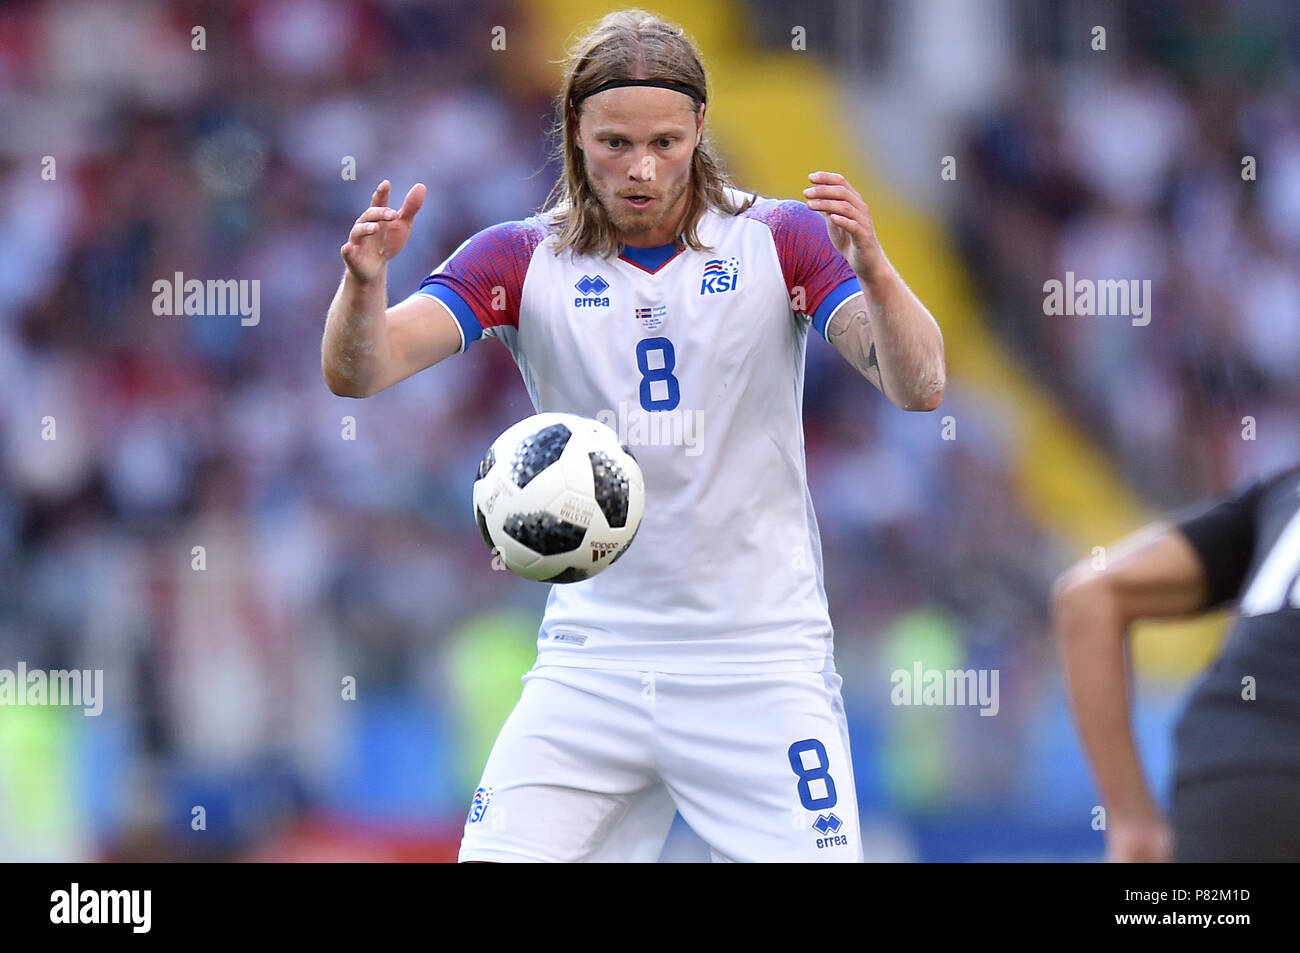 MOSCOW, RUSSIA - JUNE 16: Birkir Bjarnason of Iceland in action during the 2018 FIFA World Cup Russia group D match between Argentina and Iceland at Spartak Stadium on June 16, 2018 in Moscow, Russia. (Photo by Lukasz Laskowski/PressFocus/MB Media) Stock Photo